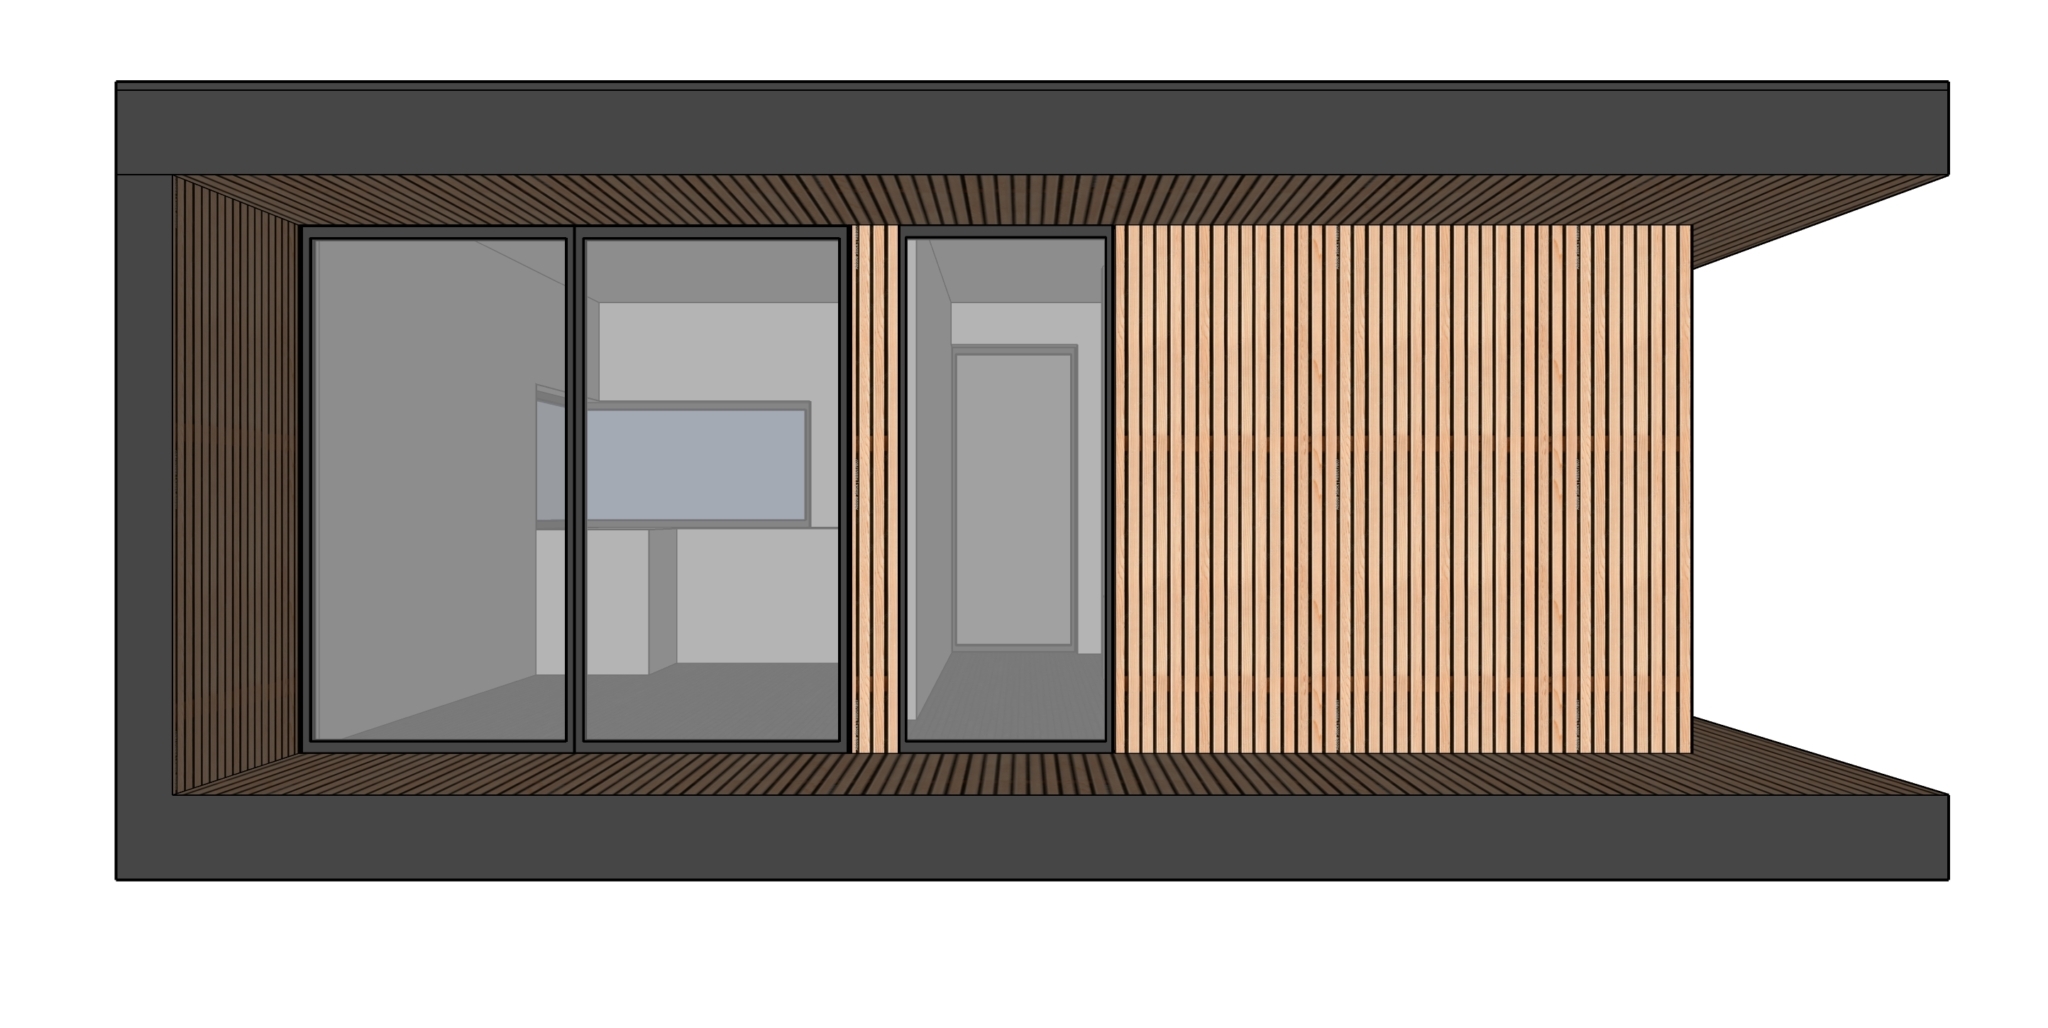 30sqm Cabin FRONT